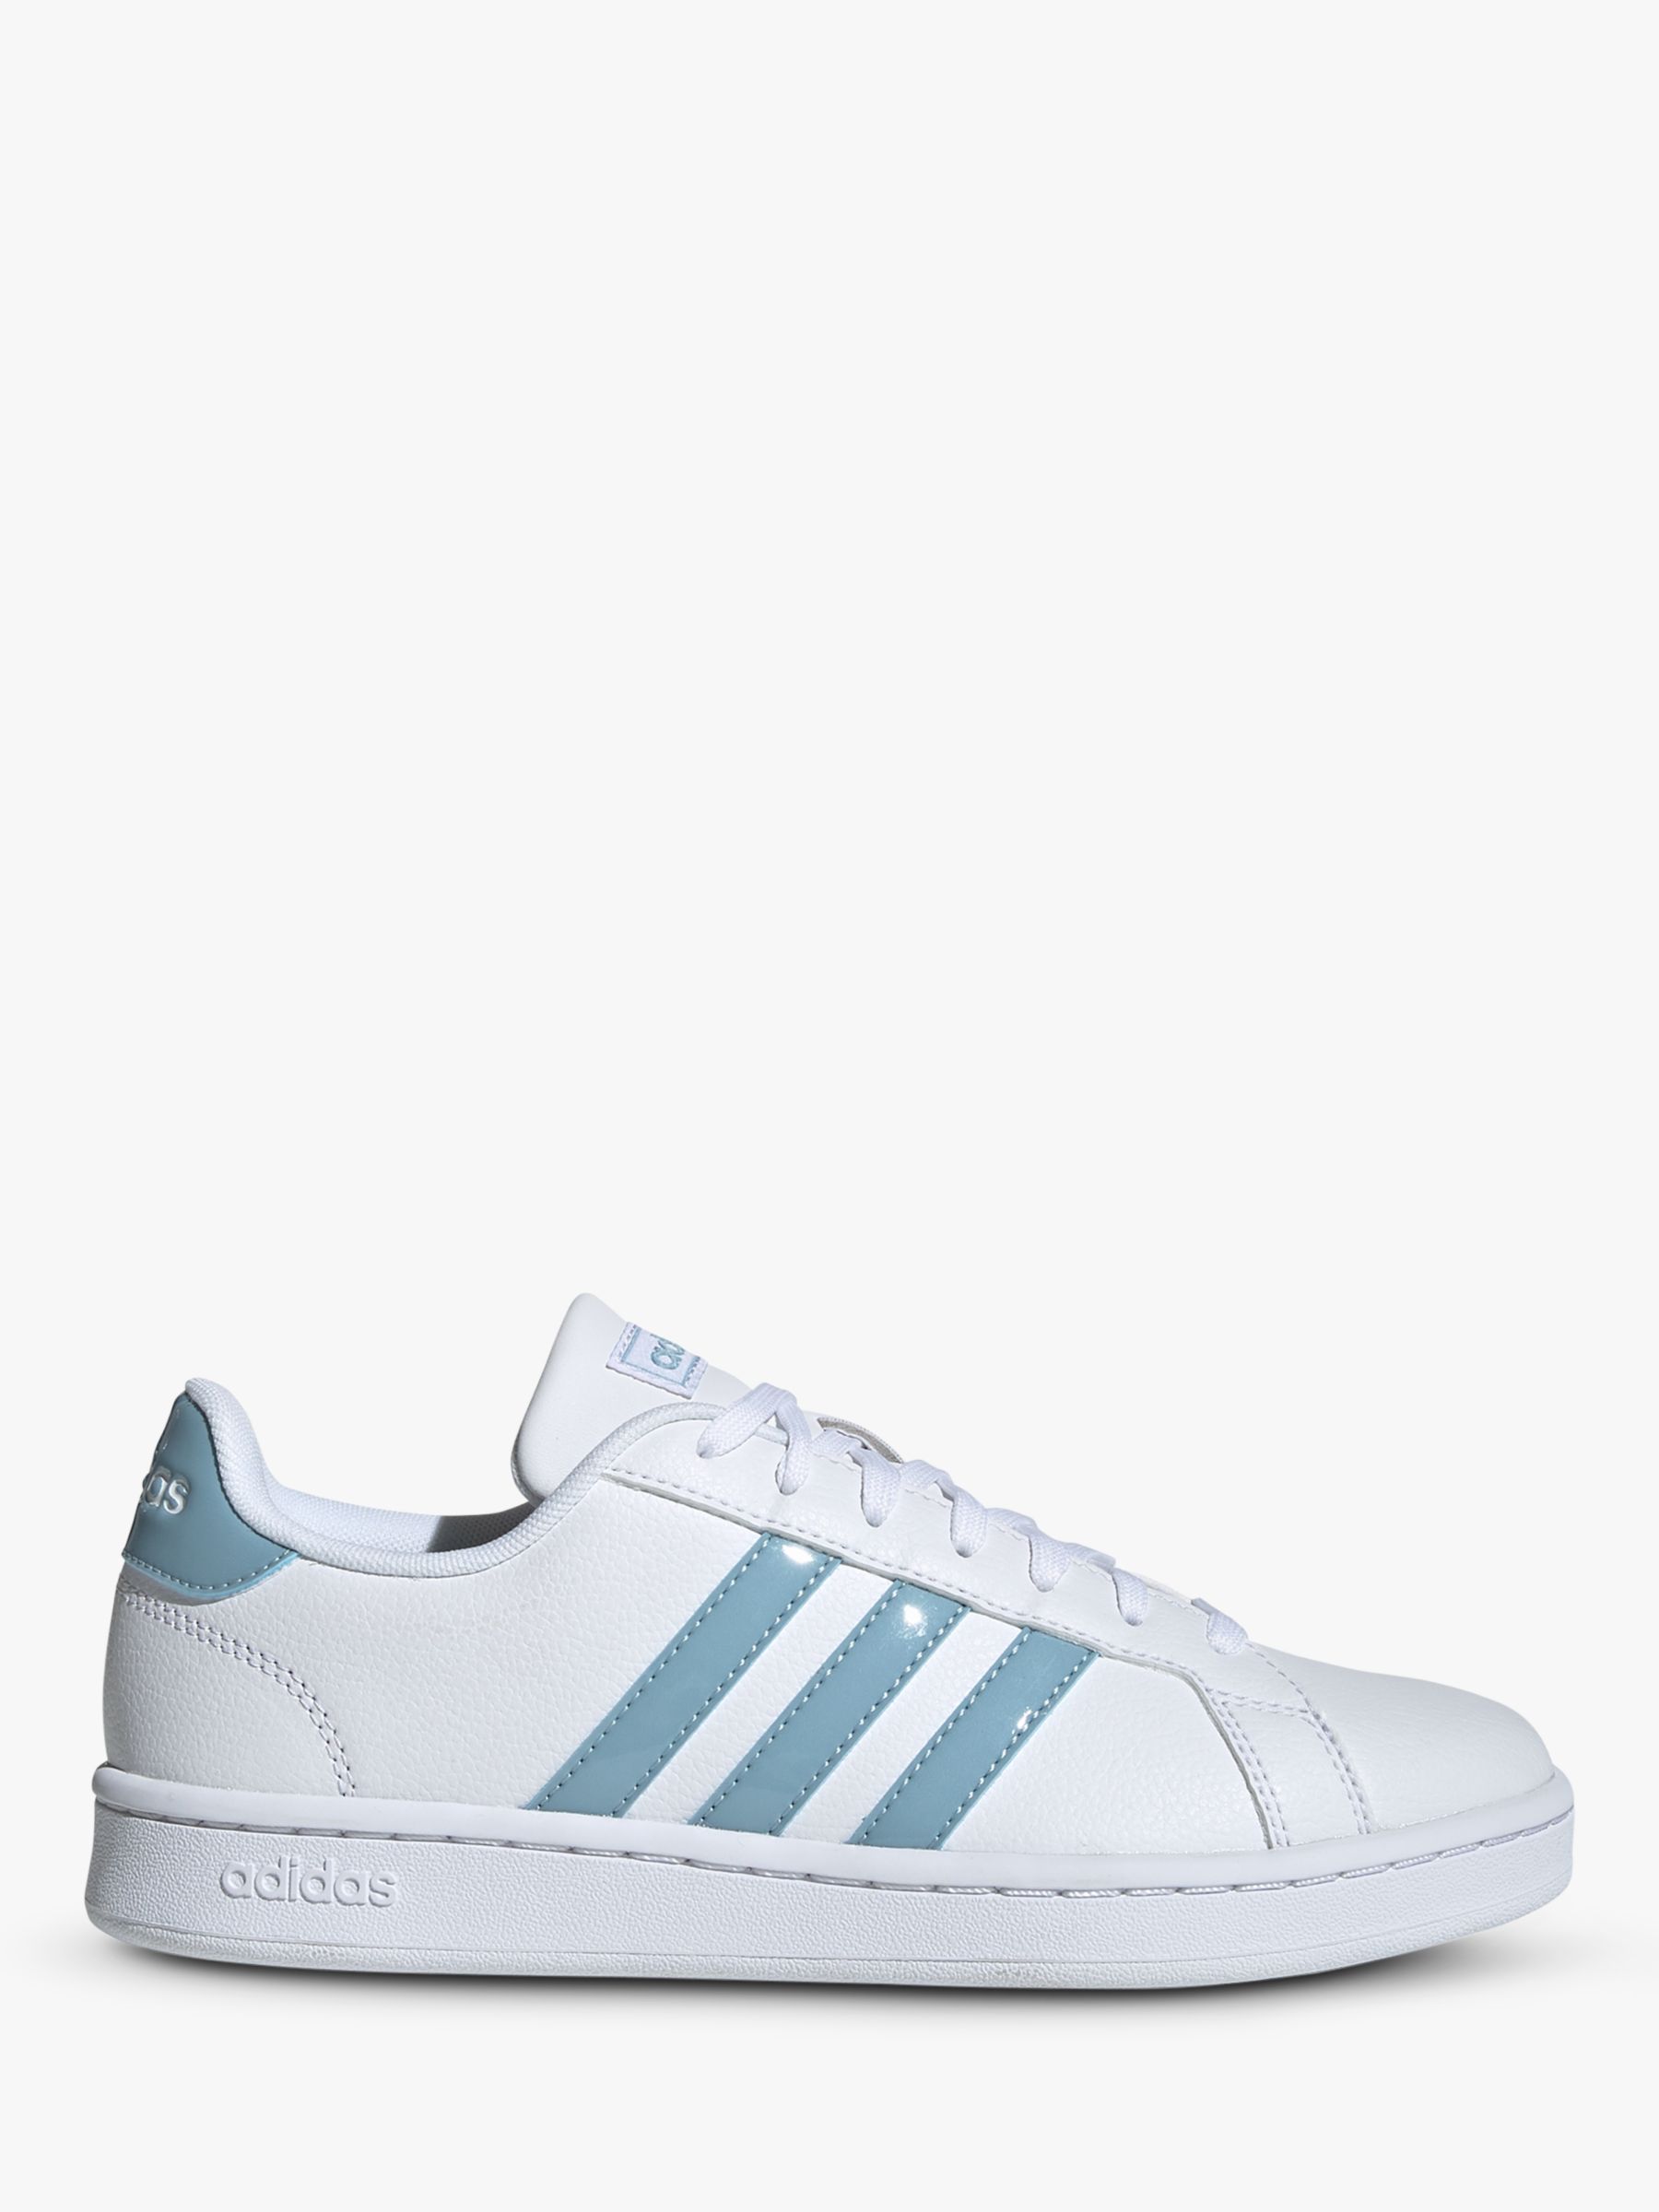 adidas Grand Court Women #39 s Trainers at John Lewis Partners